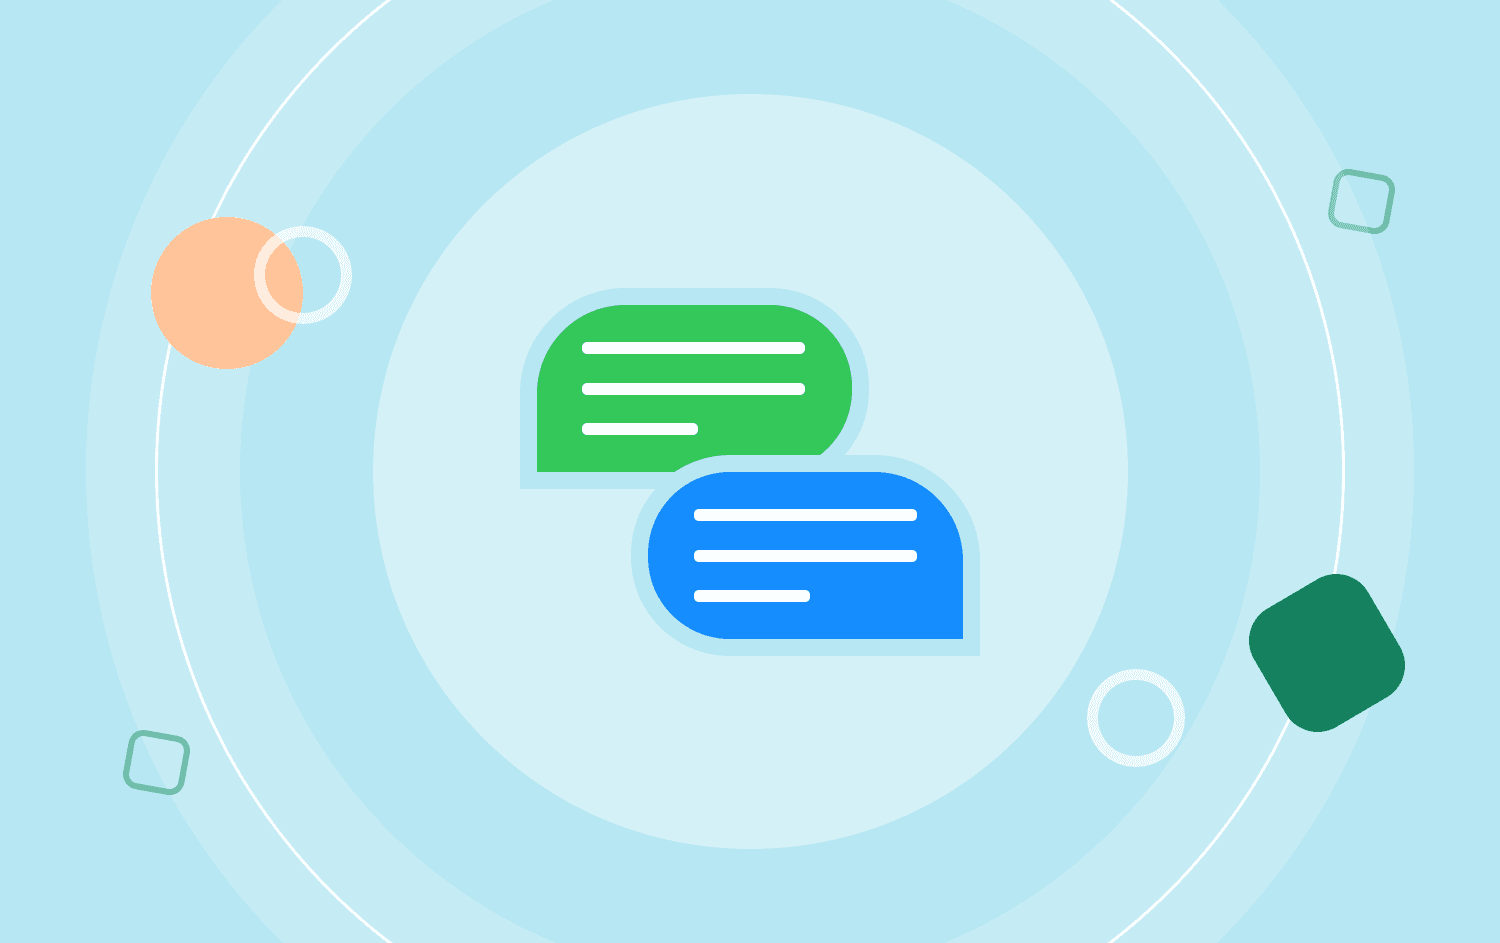 Graphic of a green text bubble and a blue text bubble representing sms and imessage